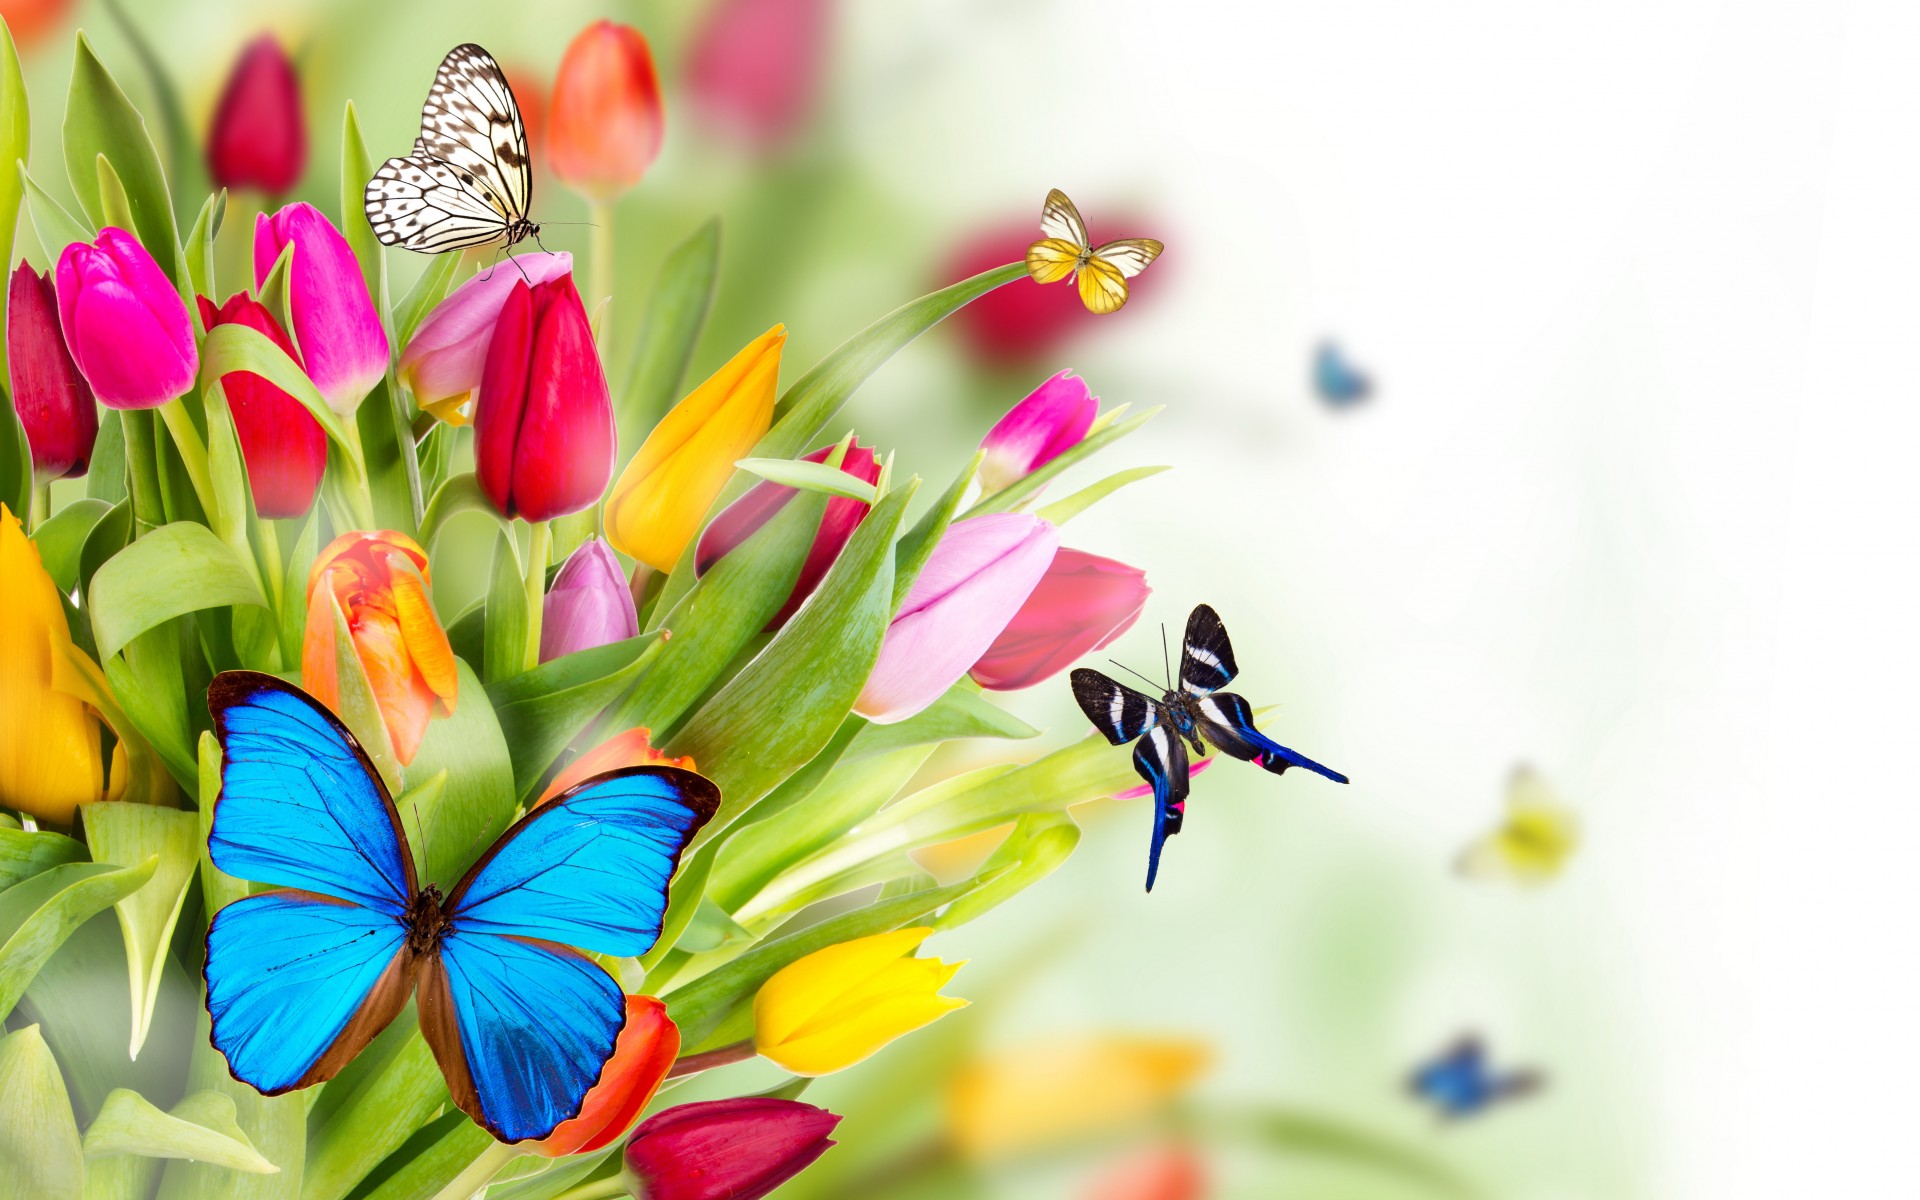 Spring Flowers Images 30 HD Wallpapers